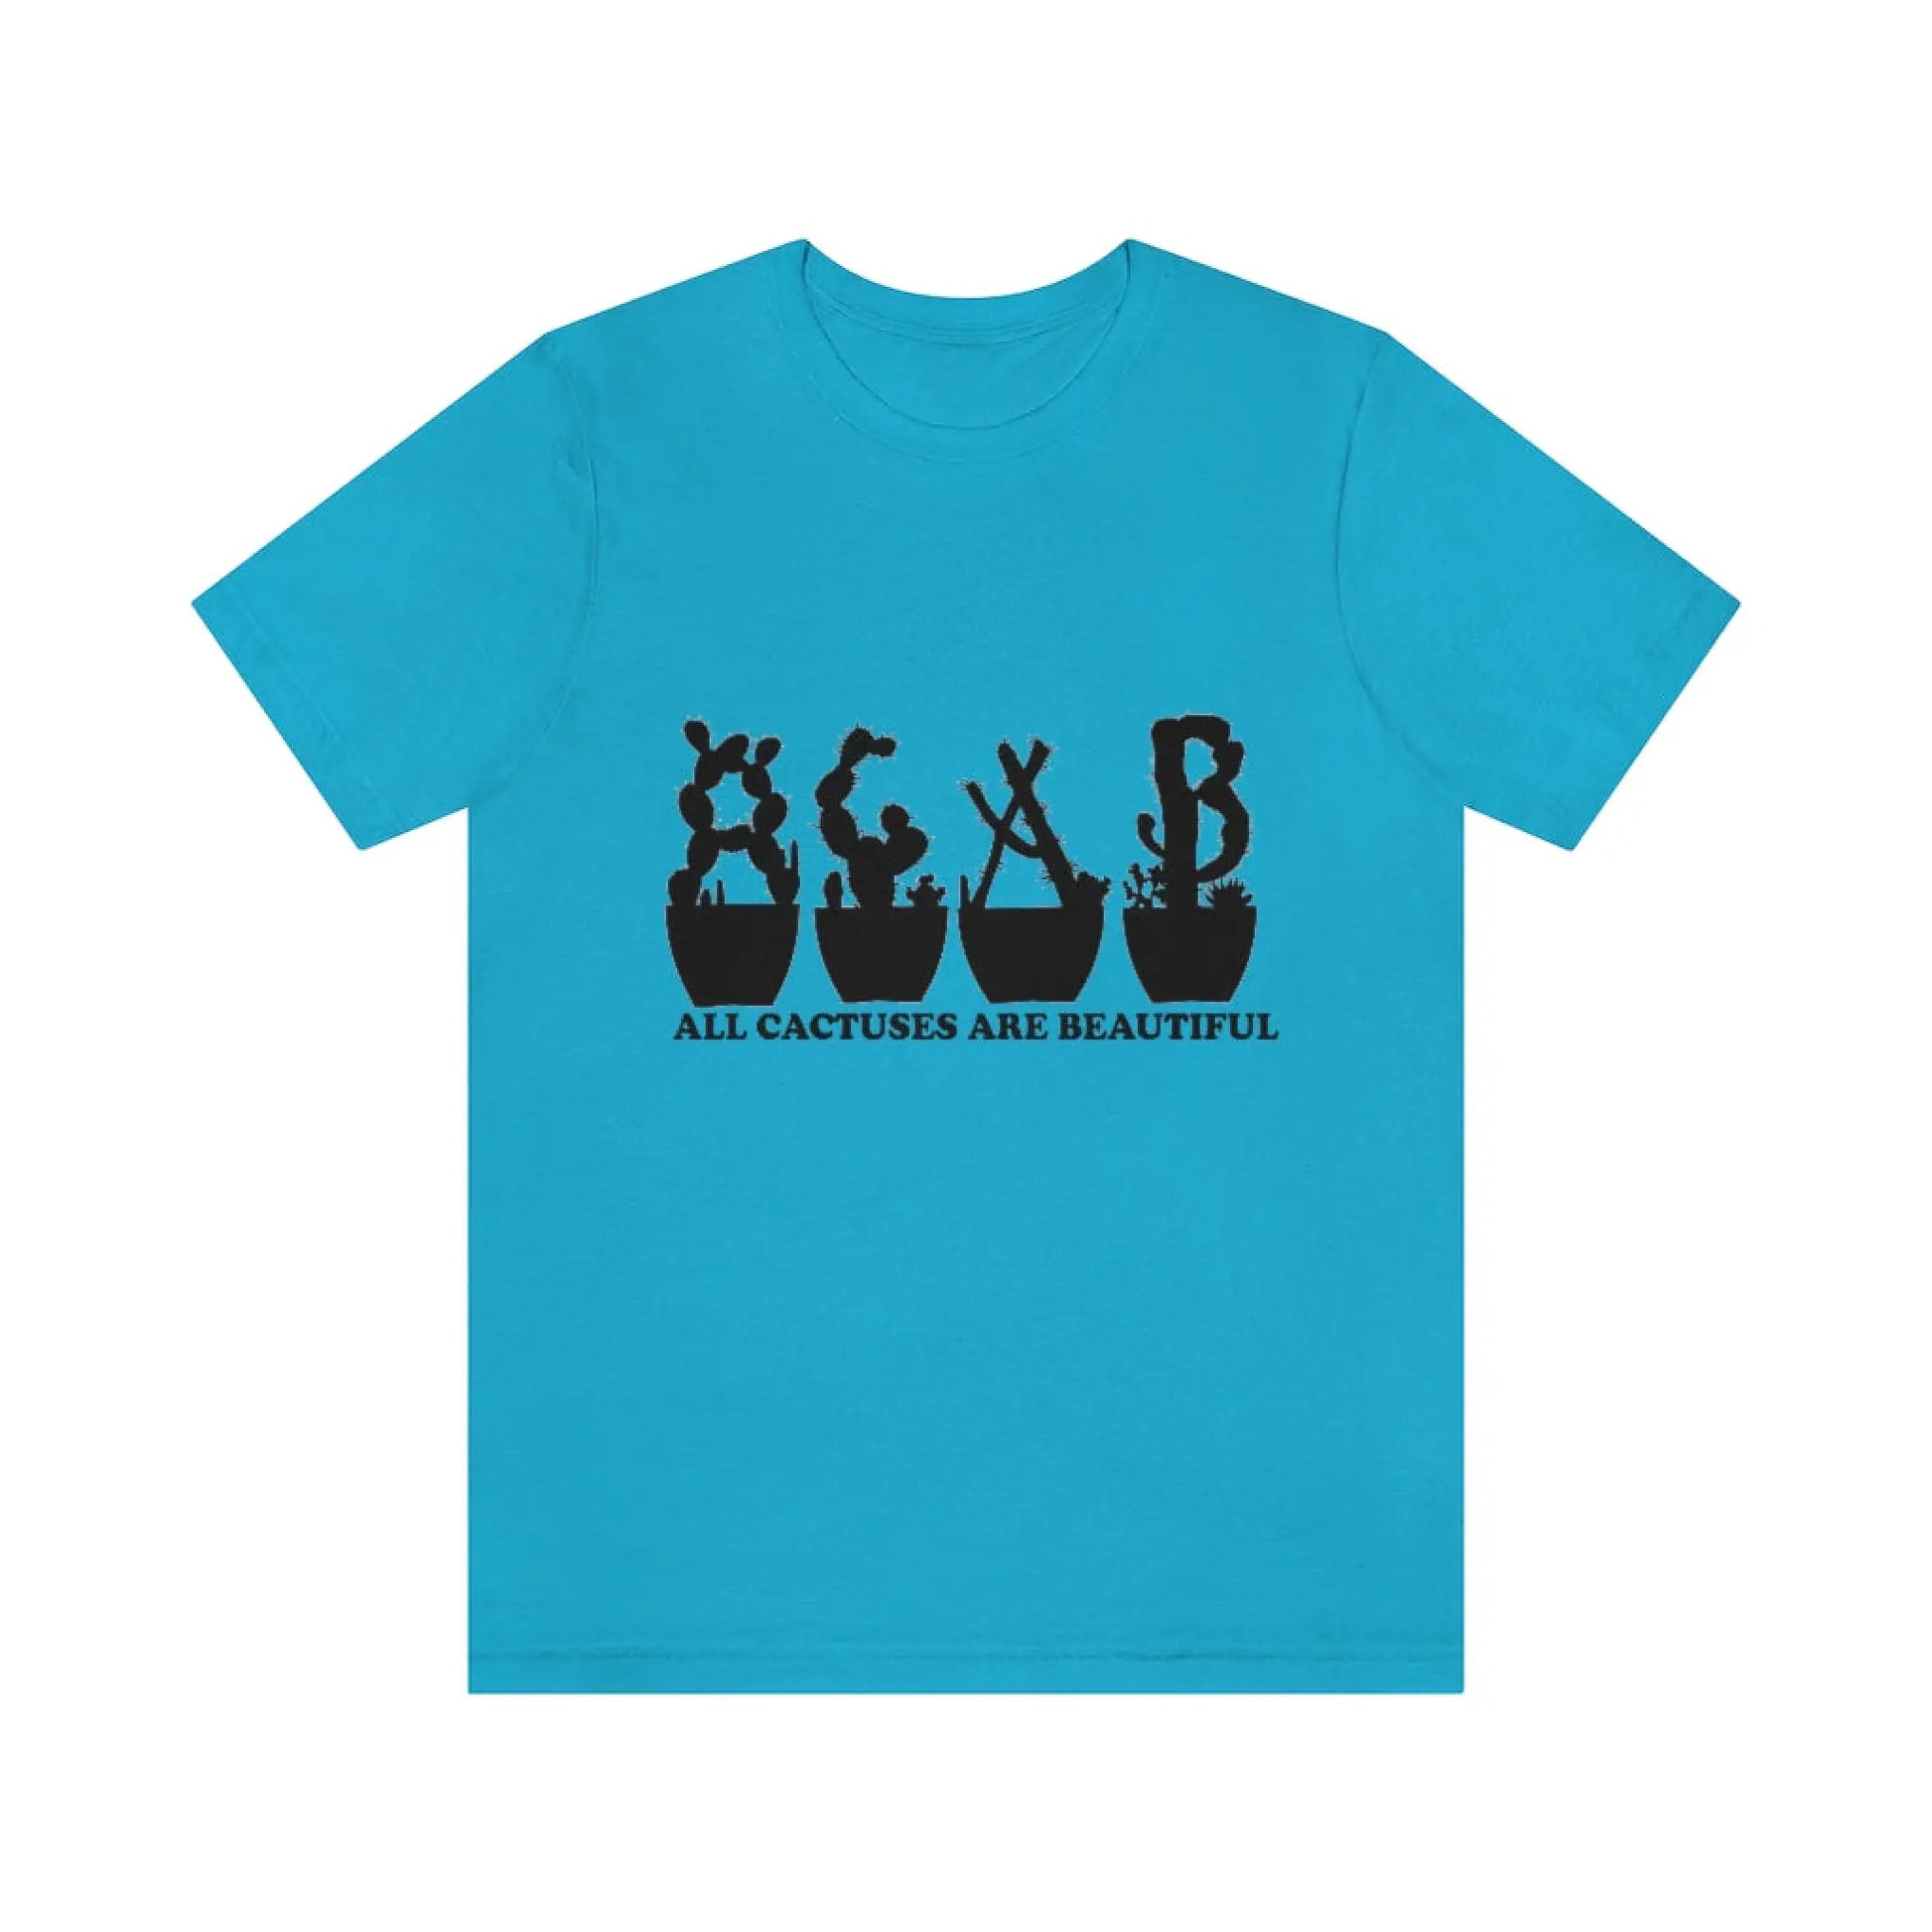 Shirts XL - All Cactuses Are Beautiful - Turquoise / 2XL -